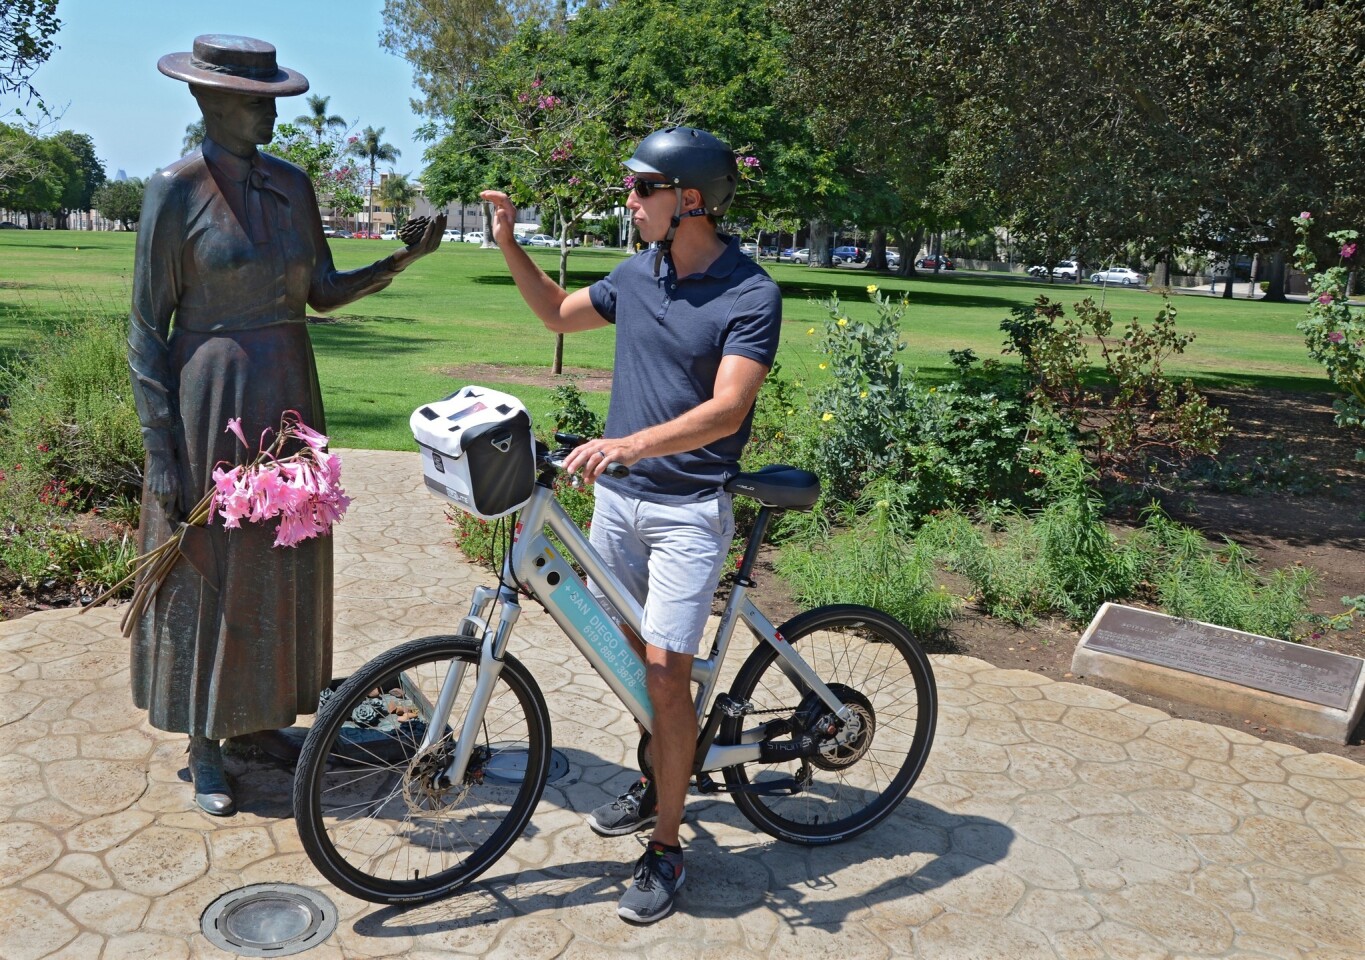 In Balboa Park, Ike Fazzio of San Diego Fly Rides, on one of his company's electric-assist bikes, greets the statue of Kate Sessions, the botanist often called "Mother Balboa" for her work in helping to create the park.